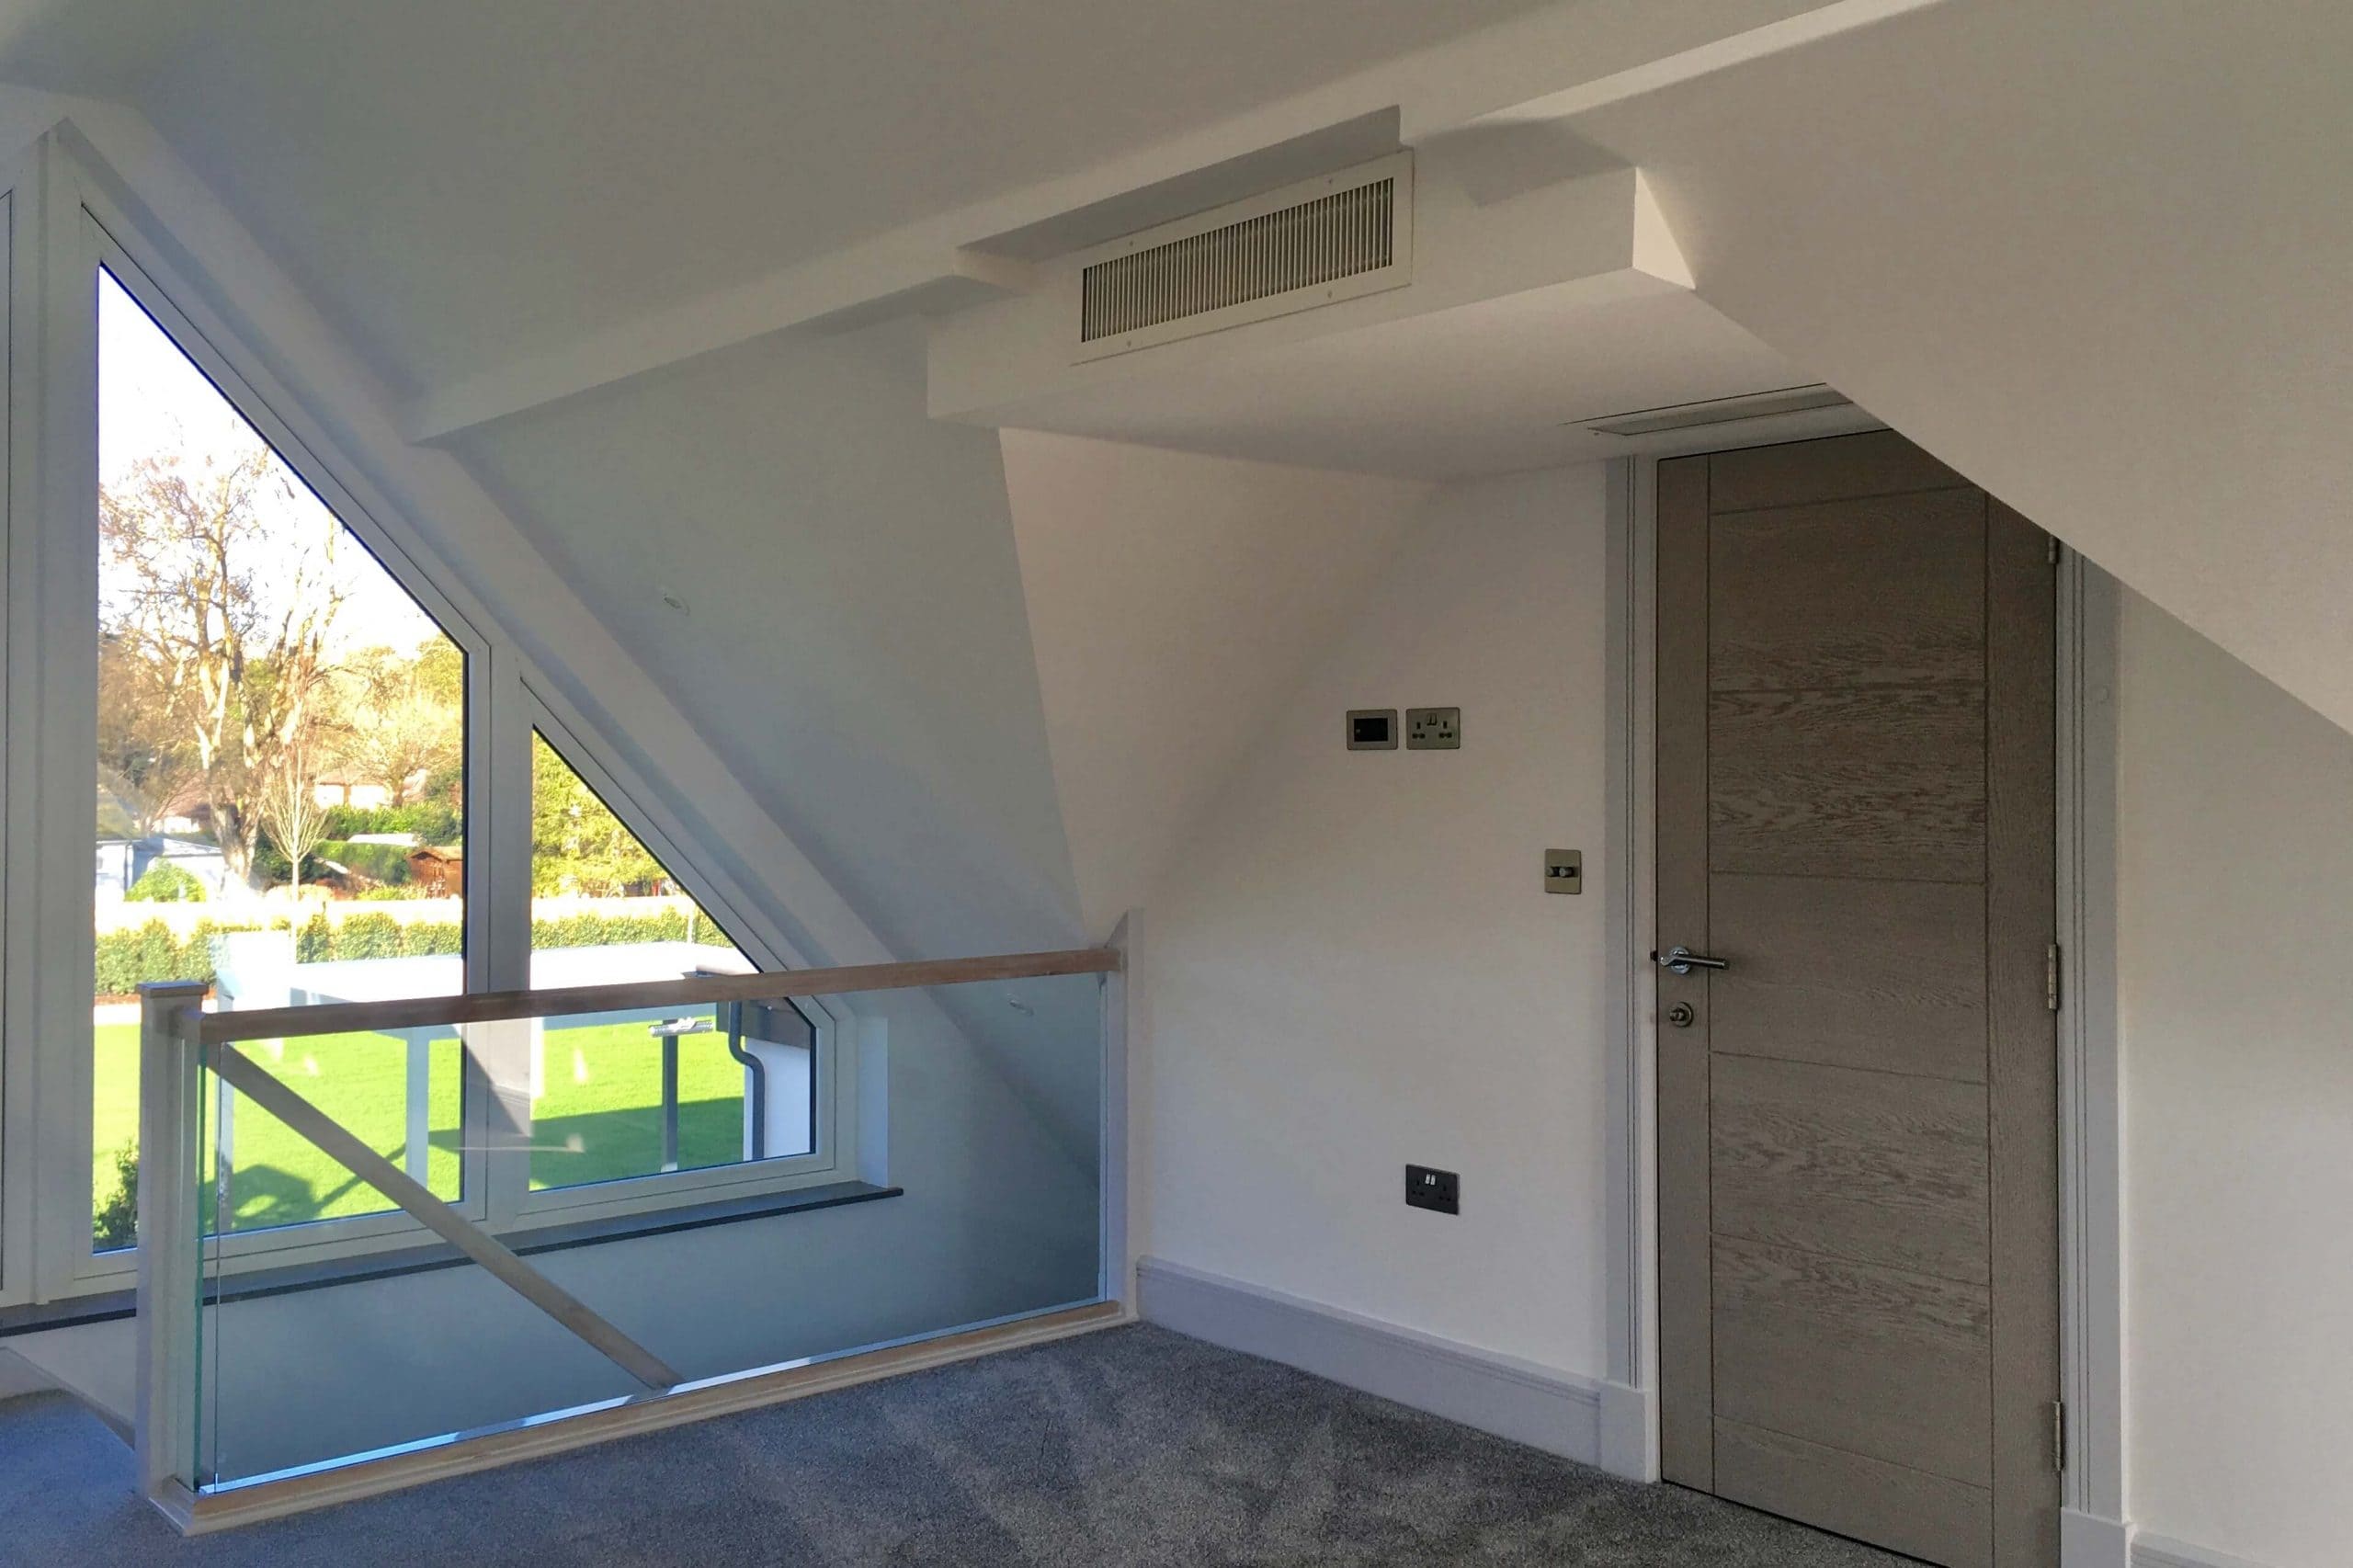 Scandia Hus new build project upstairs bedroom side view with 2 air grills by door as part of MVHR and air conditioning system by SubCool FM